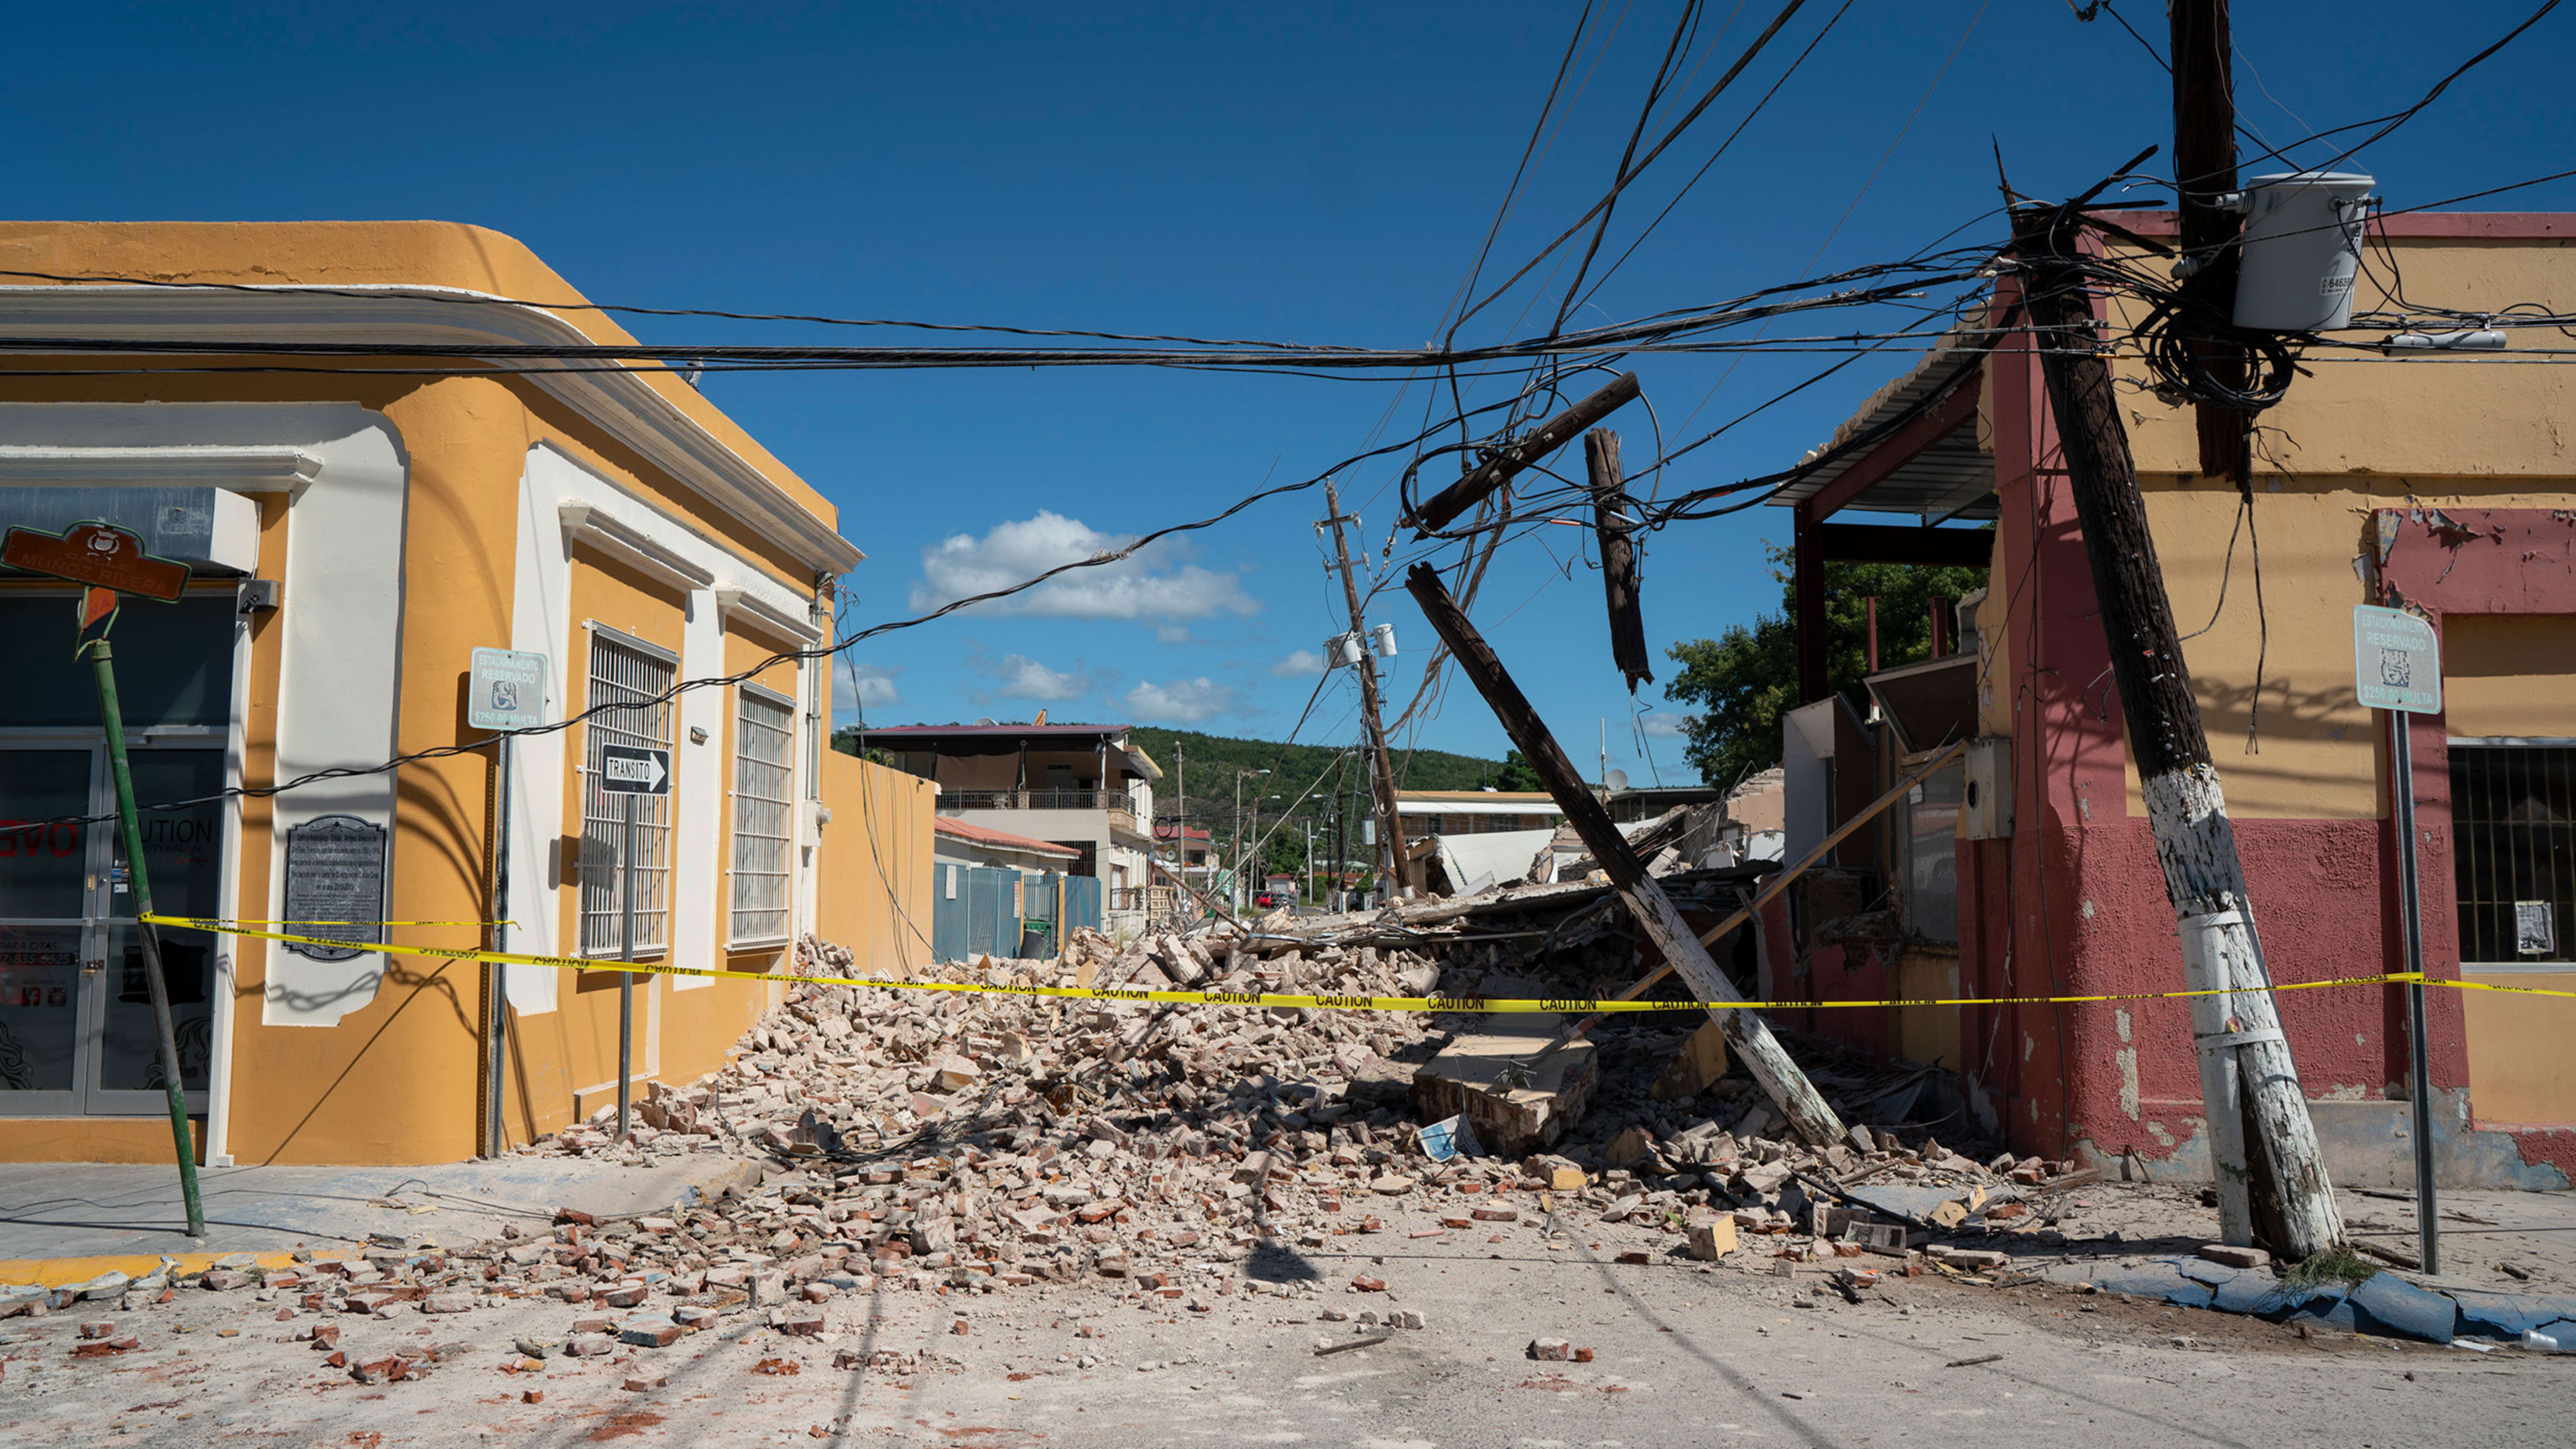 How have Puerto Rico’s new microgrids performed during its massive power outage?